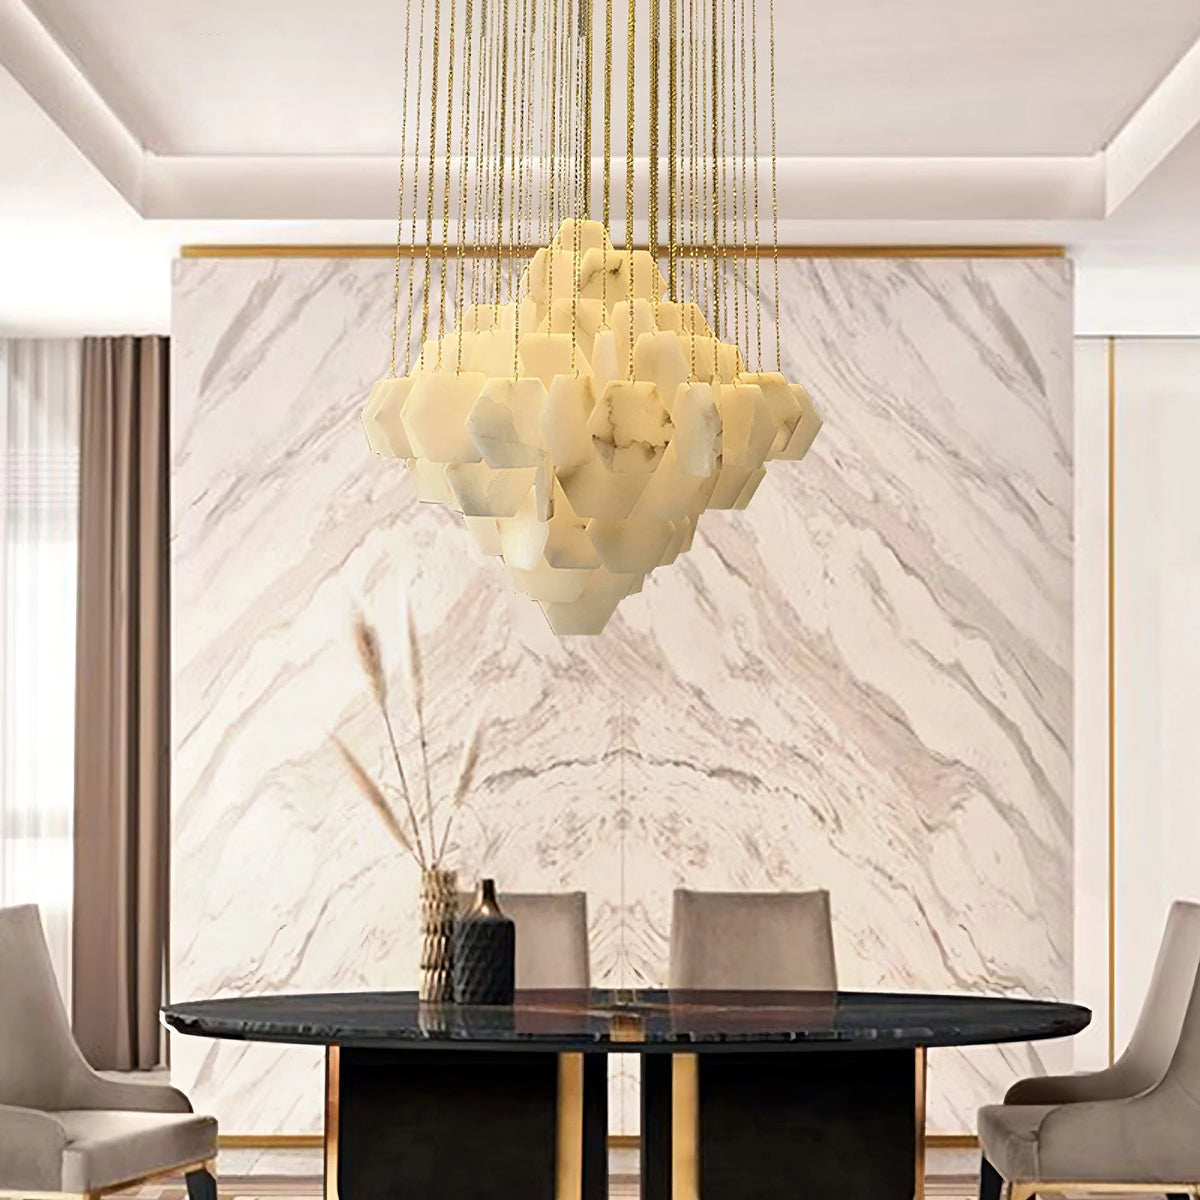 Modern dining room featuring a large, Moonshade Natural Marble Modern Chandelier by Morsale.com in warm hues hanging over a sleek, dark dining table. Surrounding the table are light-brown upholstered chairs. The room has a marble accent wall with subtle light-brown veining and minimalist decor.